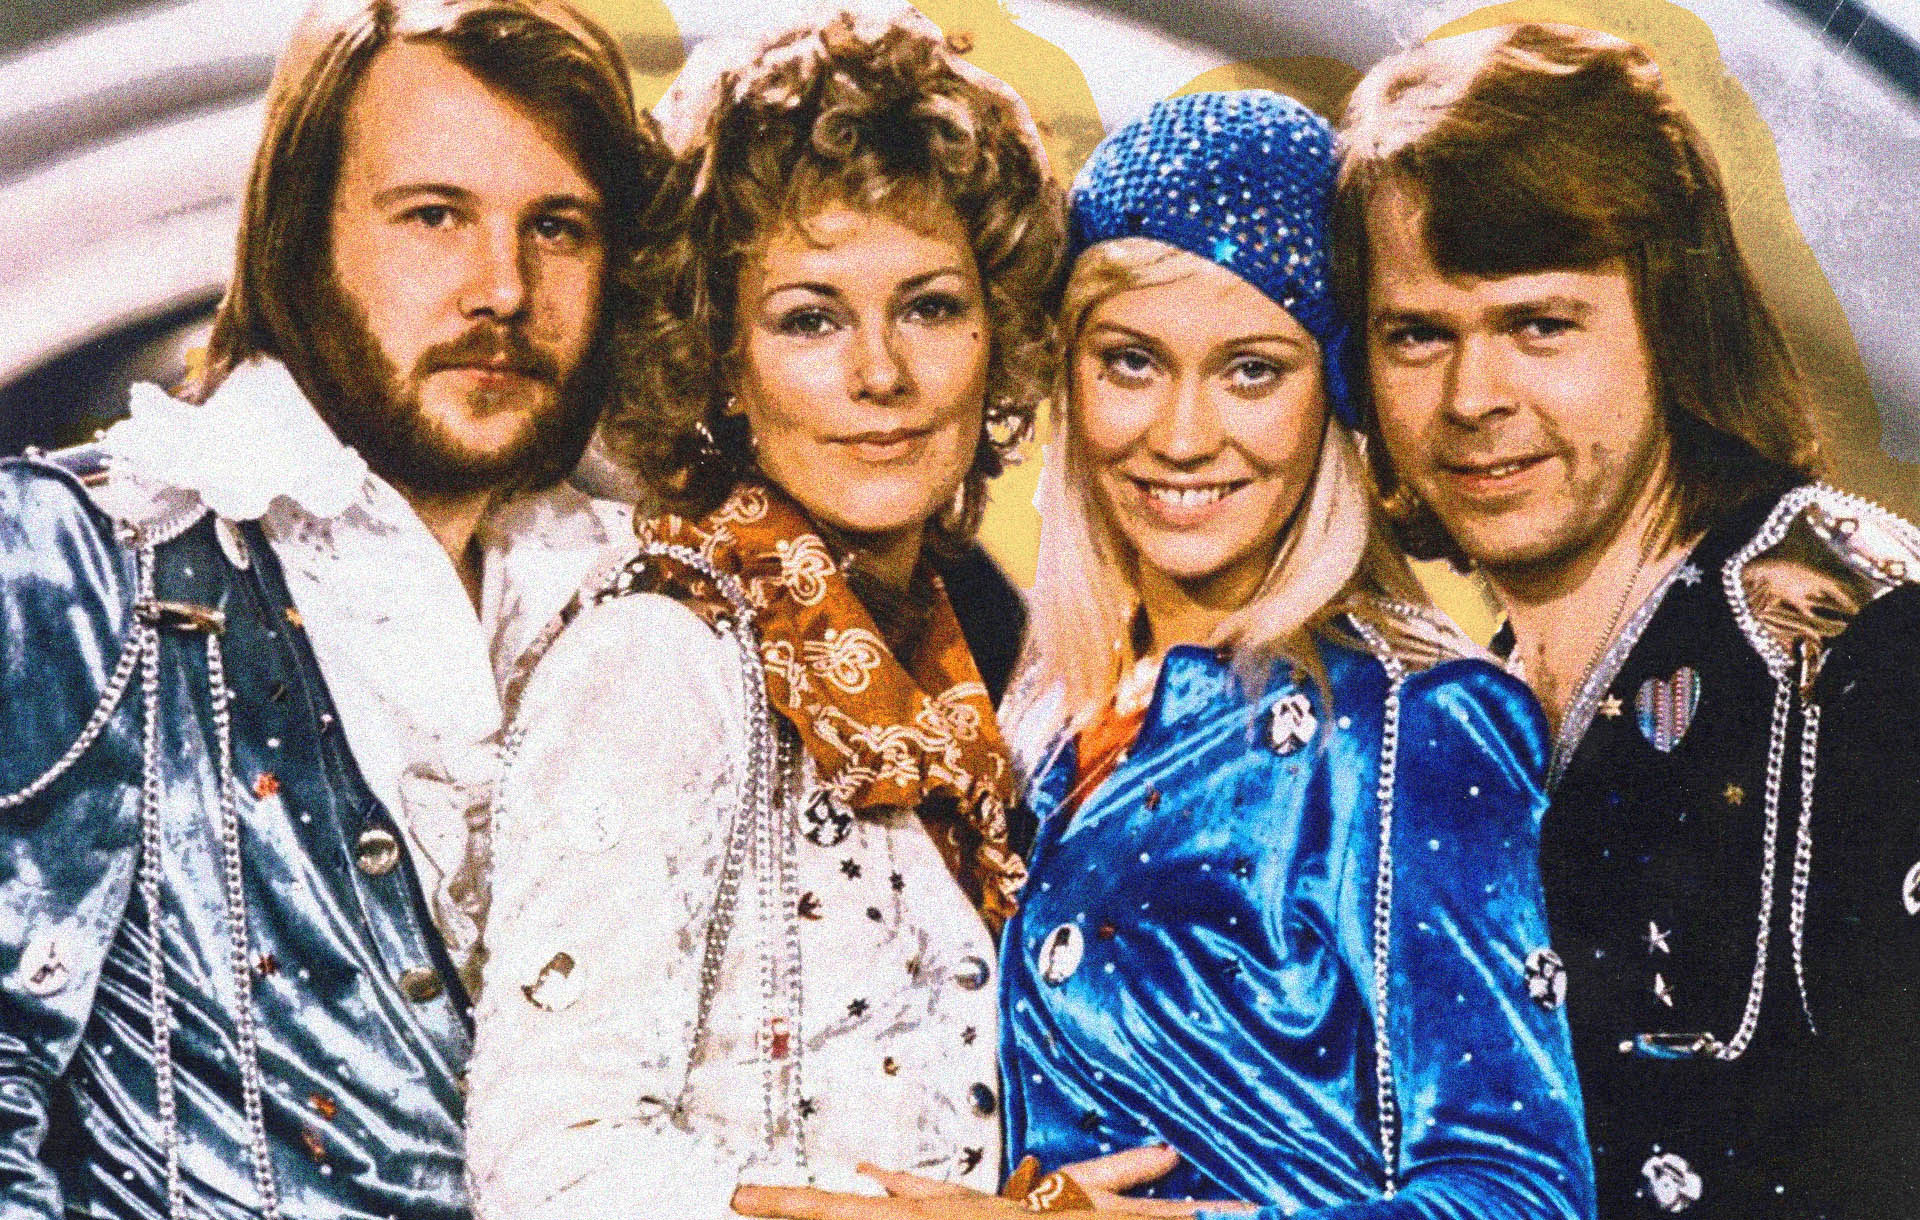 Mamma Mia! 'ABBA: Against the Odds' Gives the '70s Pop Titans Their Just Due | Features | LIVING LIFE FEARLESS